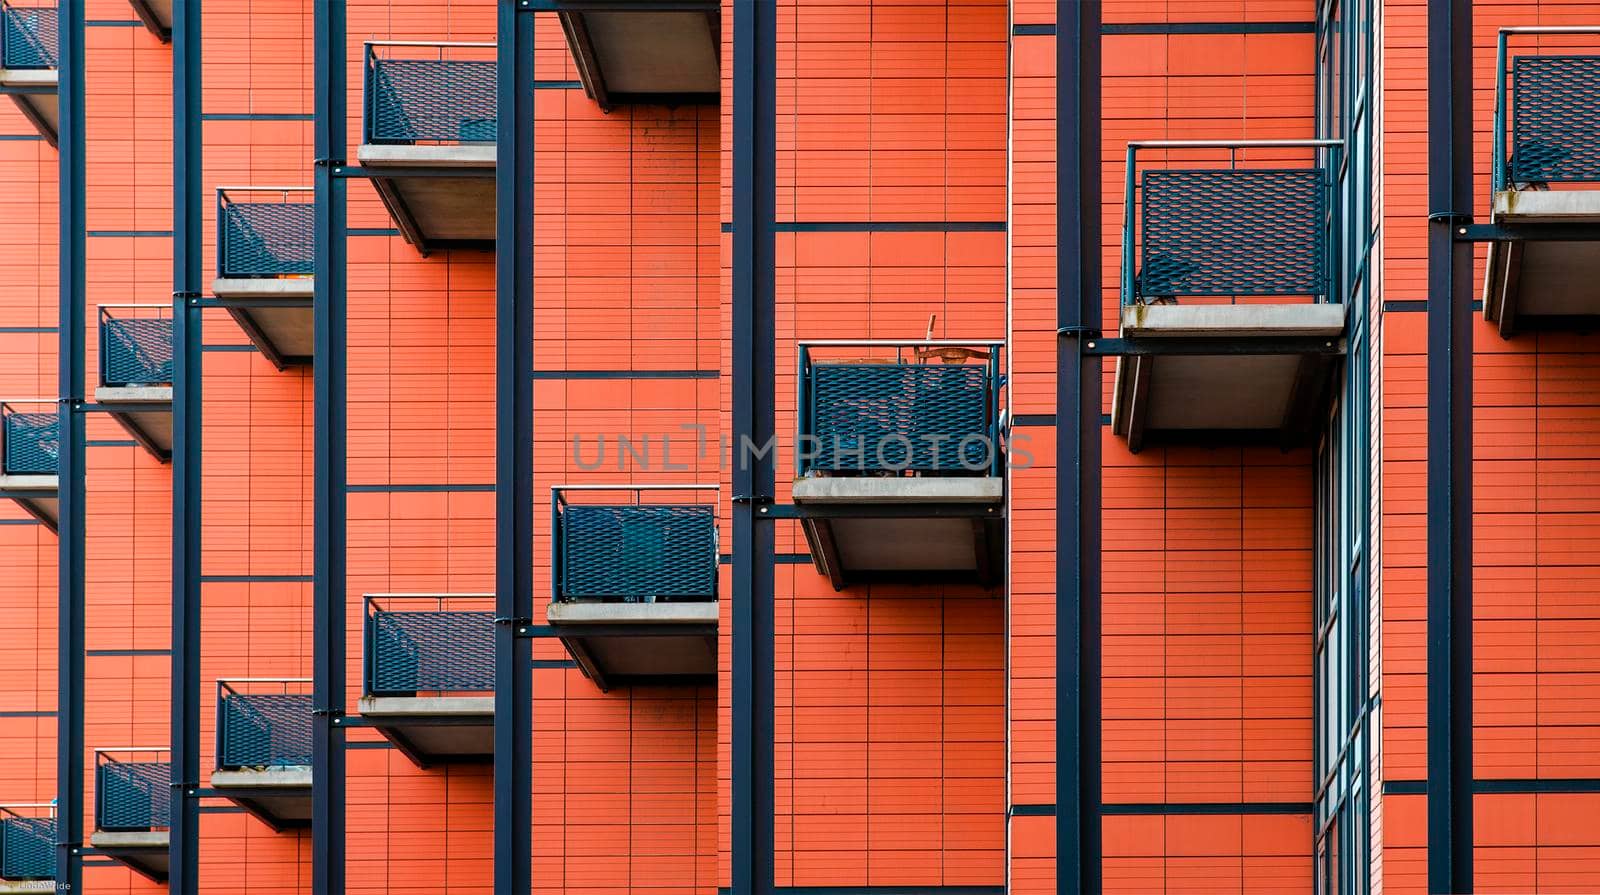 Building with many balconies, Pattern of the facade of a building, Balconies. Geometry minimalist art red by isaiphoto